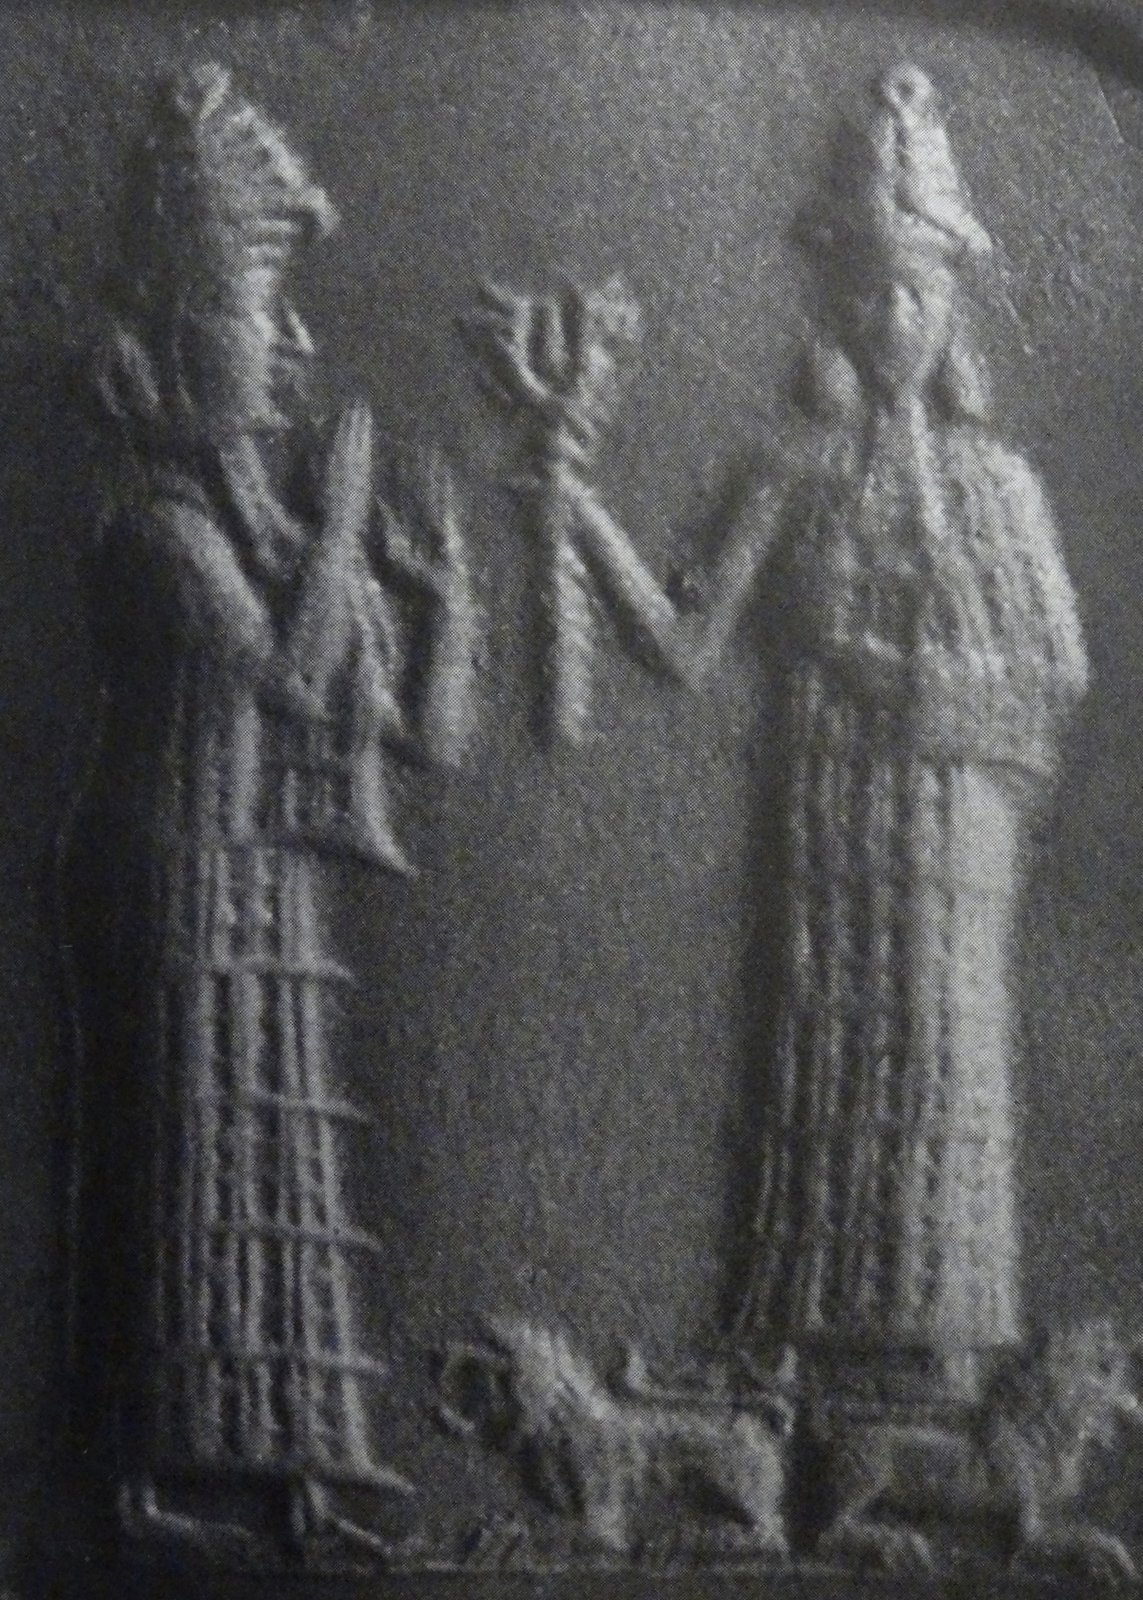 2a - Ninsun & daughter-in-law by way of many son-kings, Inanna; Inanna espoused 3 of Ninsun's 2/3rds divine sons made kings making Inanna Ninsun's daughter-in-law even though they are cousins on Enlil's side of the family